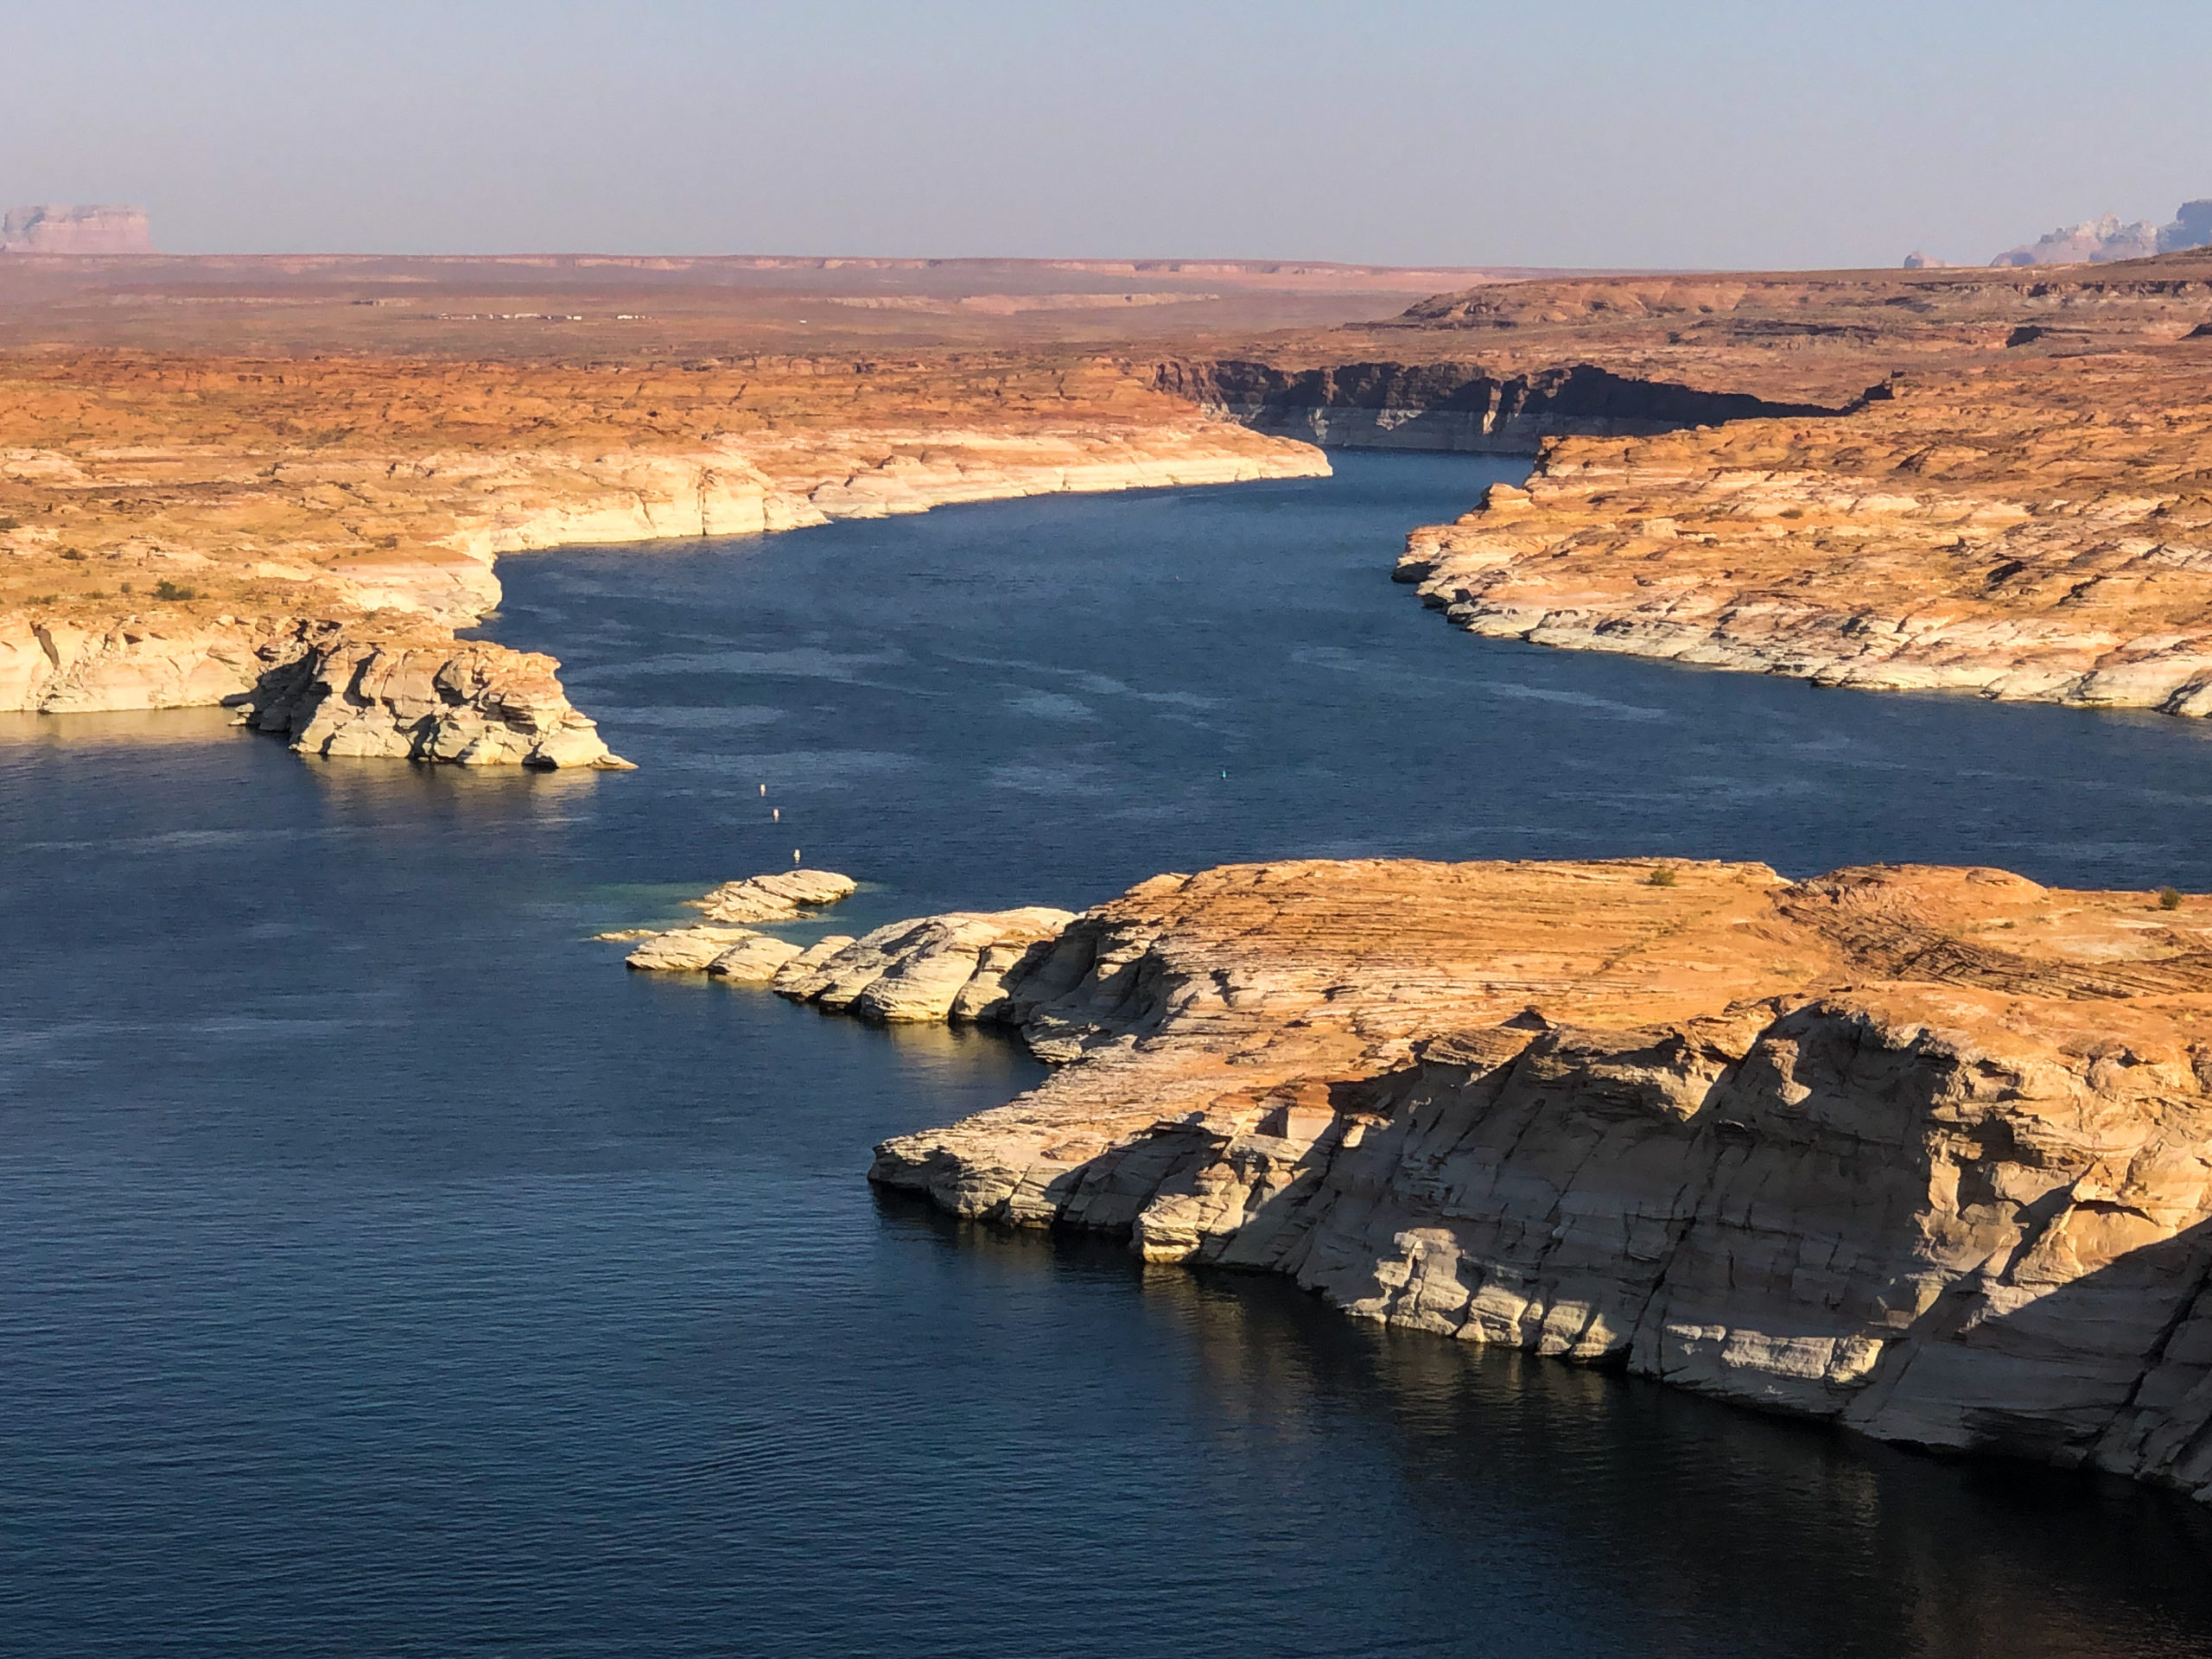 Lake Powell ended the 2020 “water year” at an elevation of 3,596 feet above sea level. That is 104 feet below what is considered Powell’s full capacity. The “water year” is a term used by the U.S. Geological Survey to measure the 12-month hydrologic cycle between Oct. 1 and Sept. 30. The October start date is used to mark when snow begins to accumulate in the mountains. Photo credit: Denver Water.